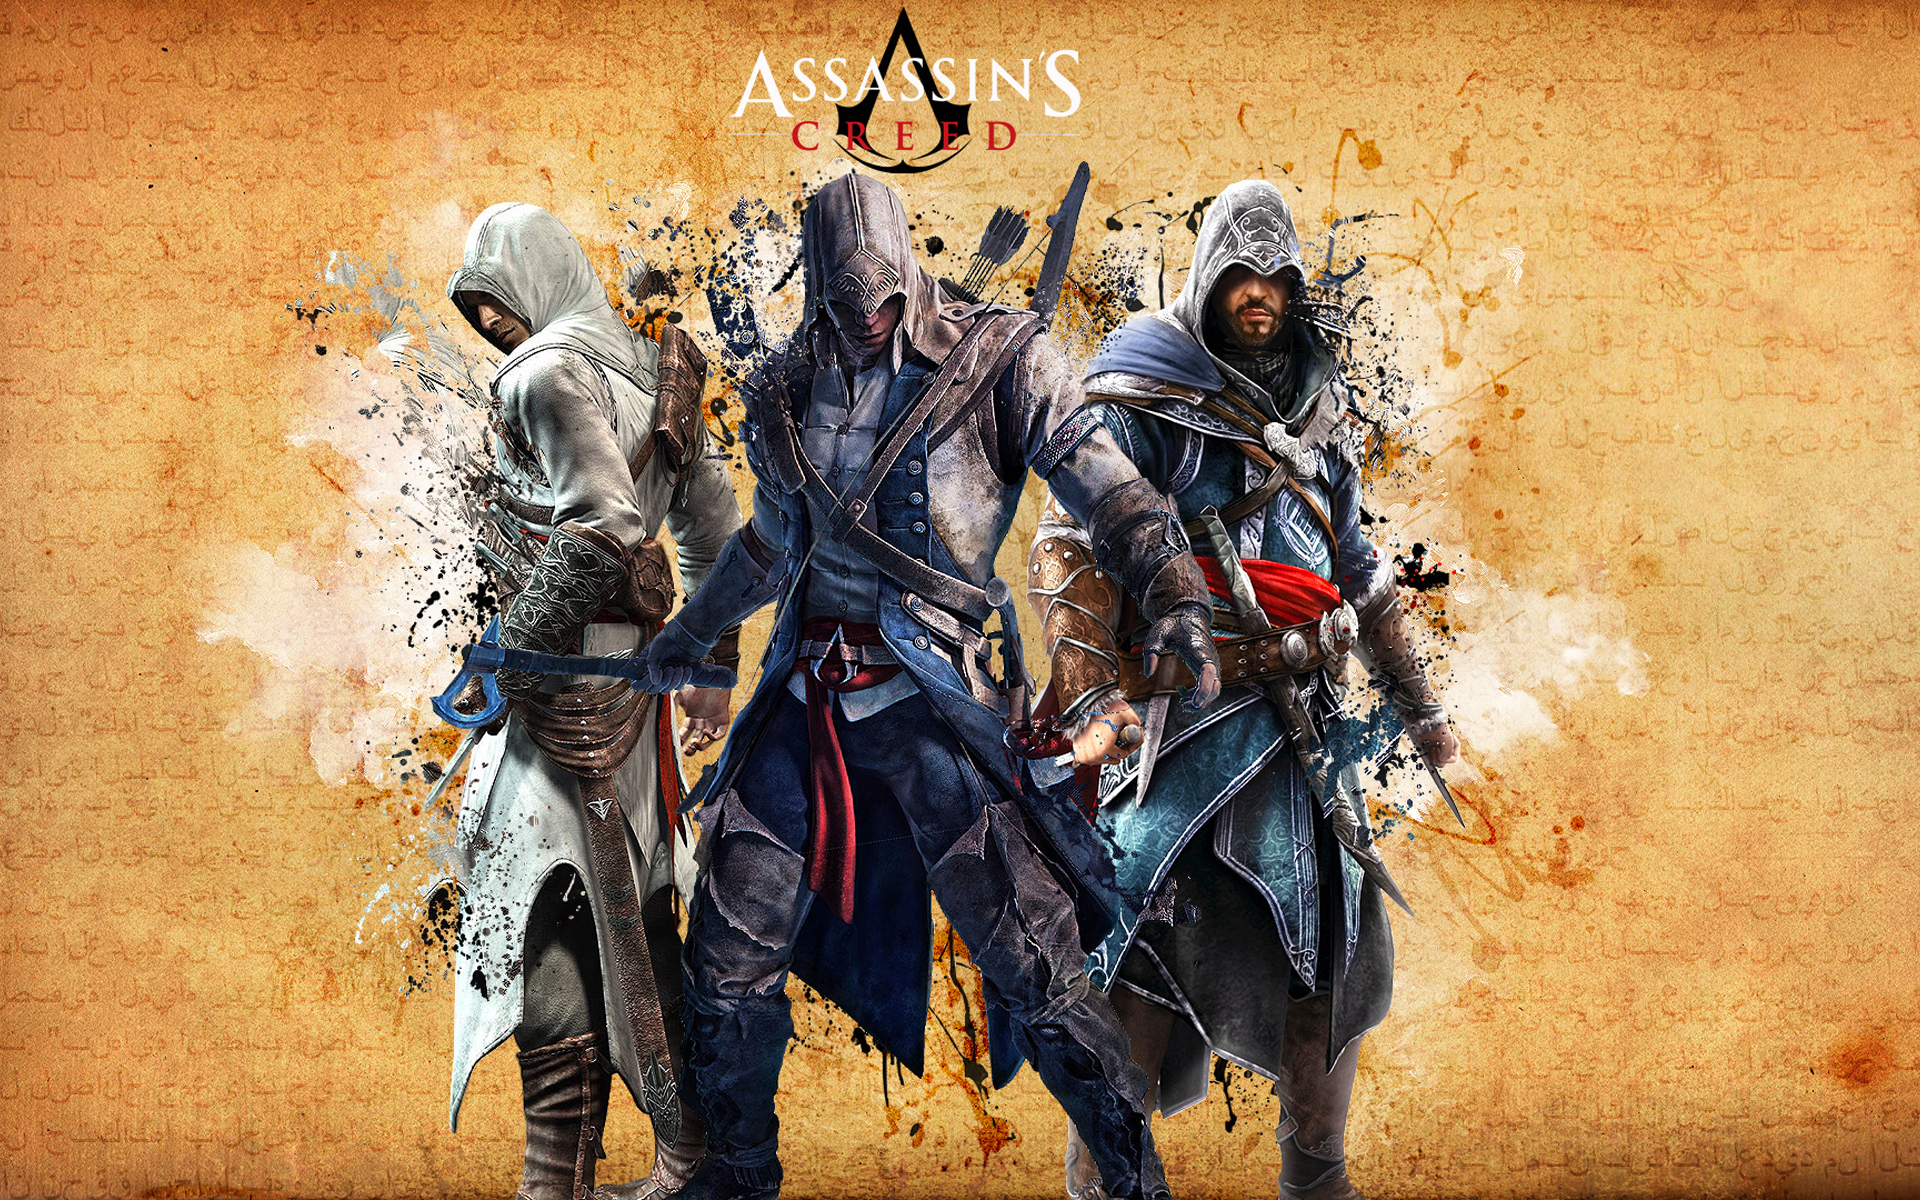 connor (assassin's creed), video game, assassin's creed, altair (assassin's creed), ezio (assassin's creed)